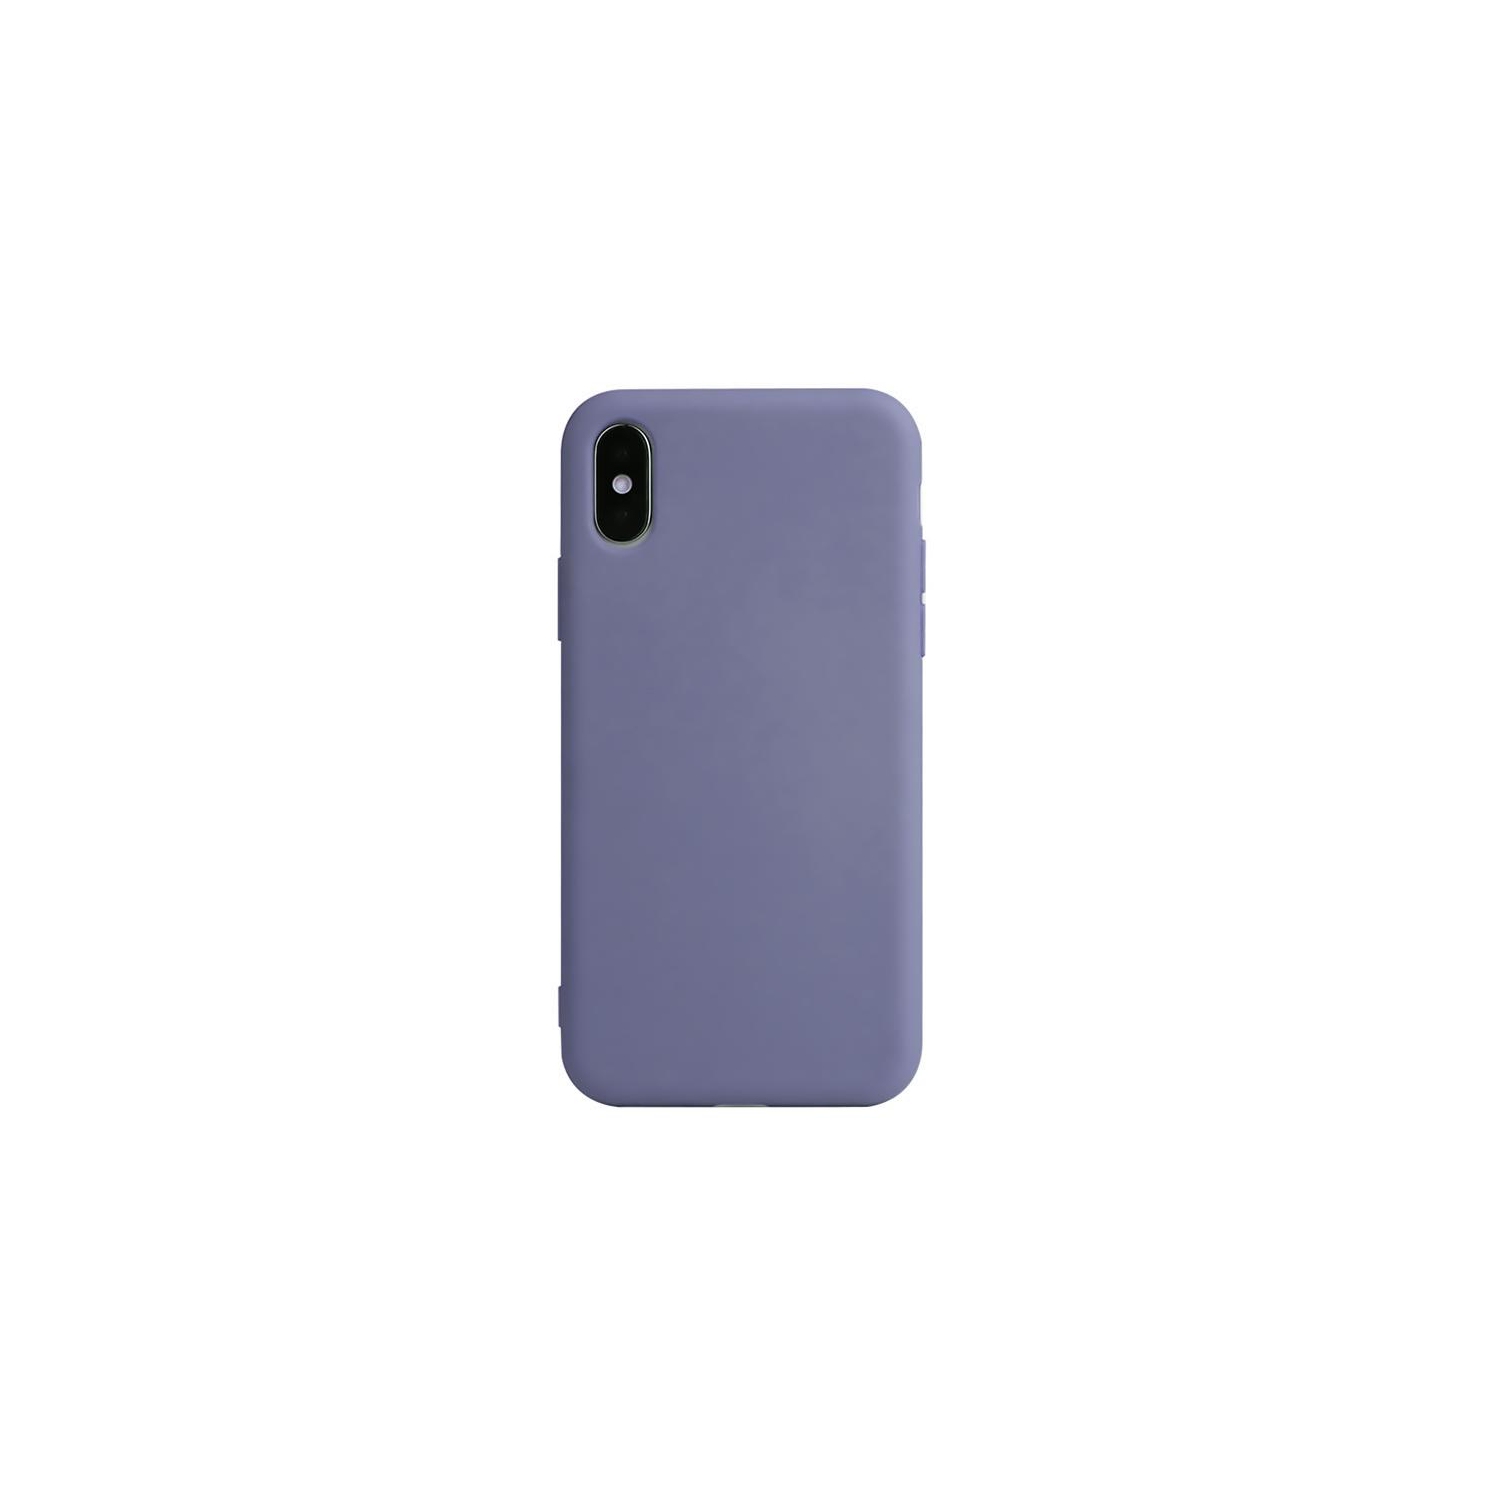 PANDACO Soft Shell Matte Lavender Grey Case for iPhone X or iPhone Xs